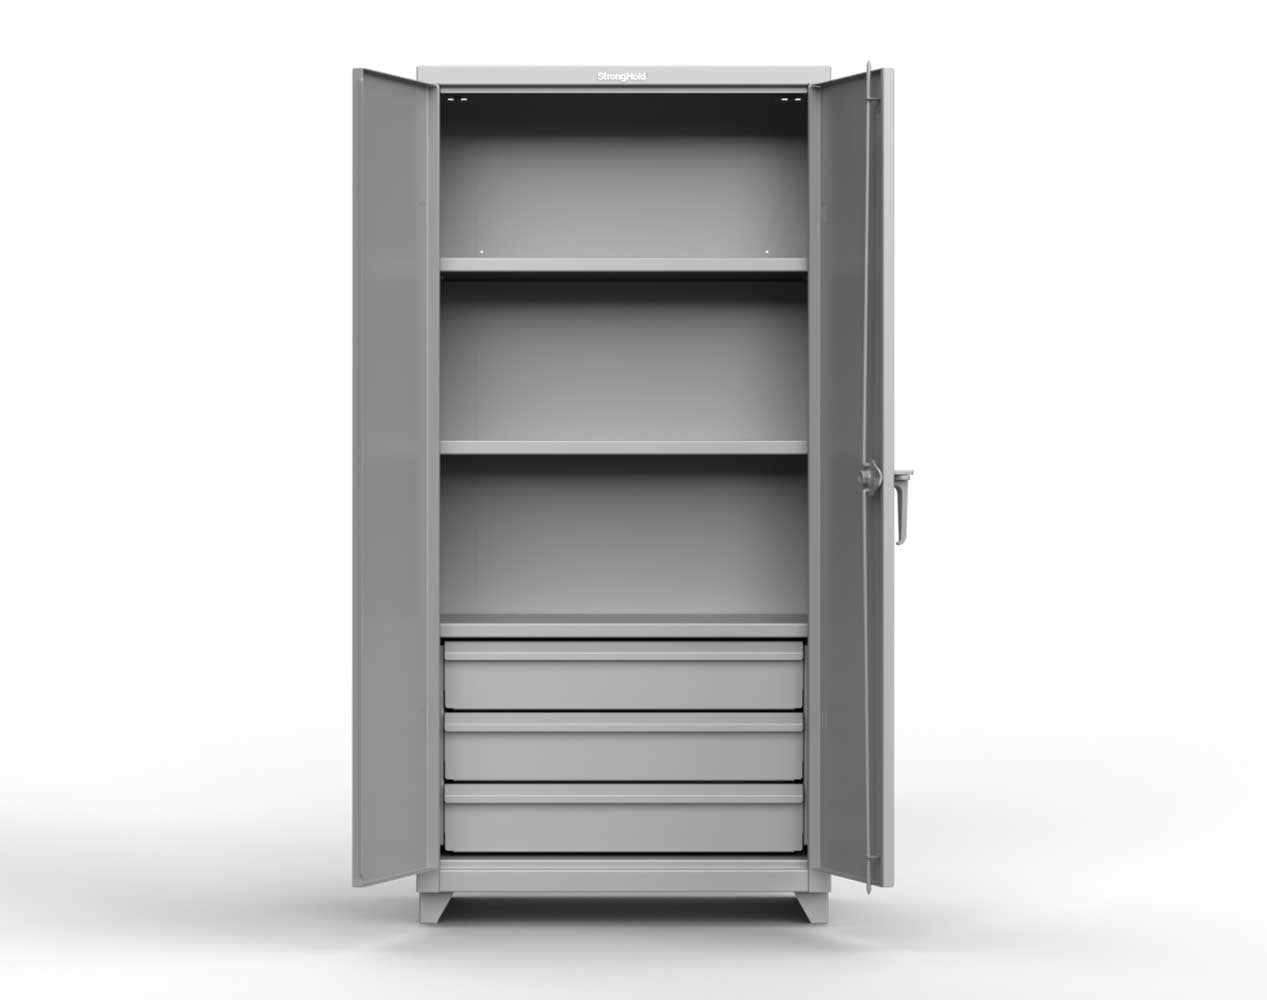 Extra Heavy Duty 14 GA Cabinet with 3 Drawers, 4 Shelves - 36 In. W x 24 In. D x 75 In. H